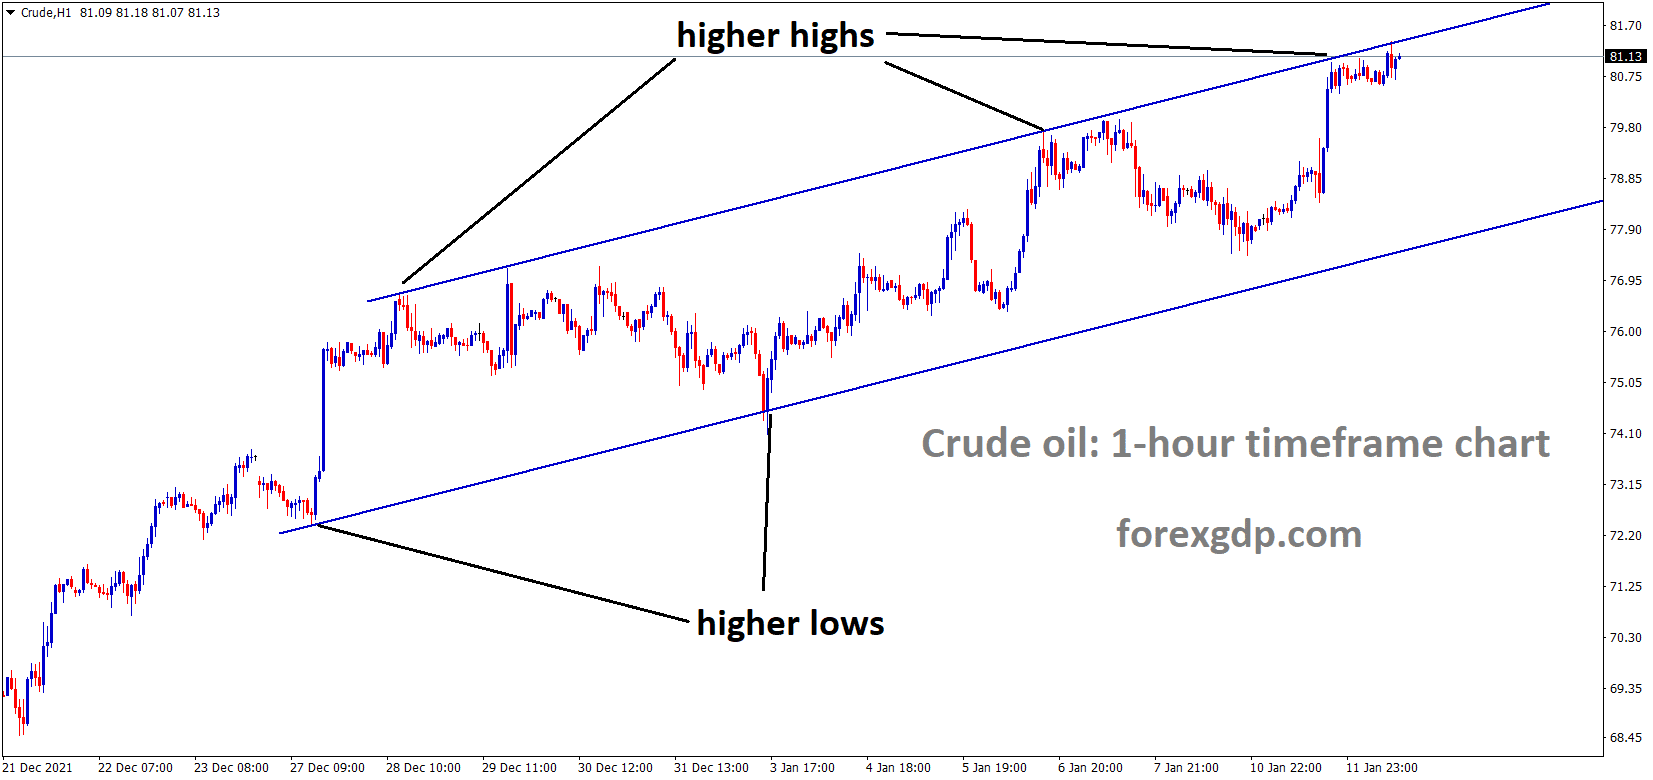 Crudeoil is moving in an Ascending channel and the market has reached the higher high area of the channel